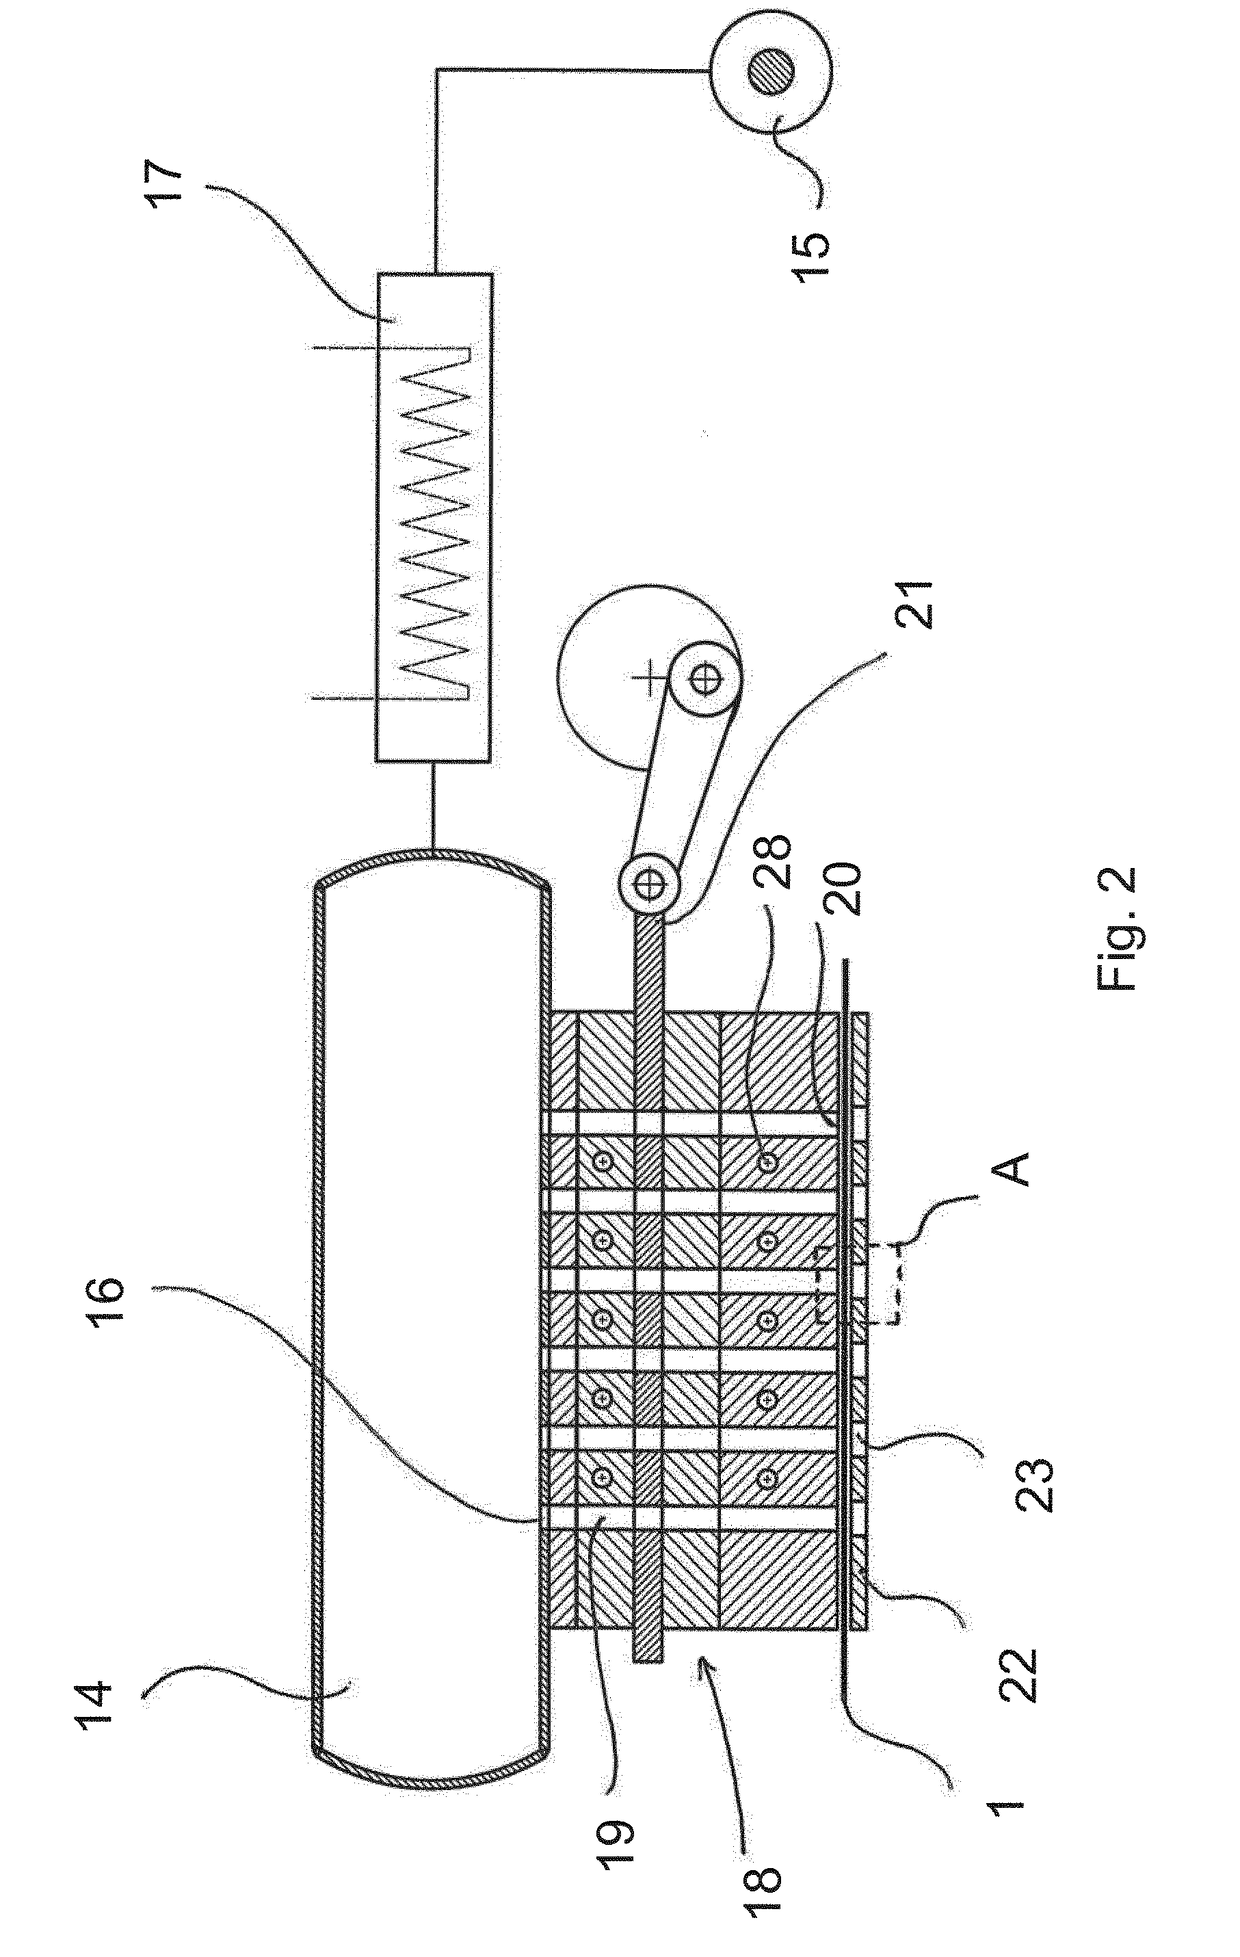 Method and apparatus for perforating a film of plastic material